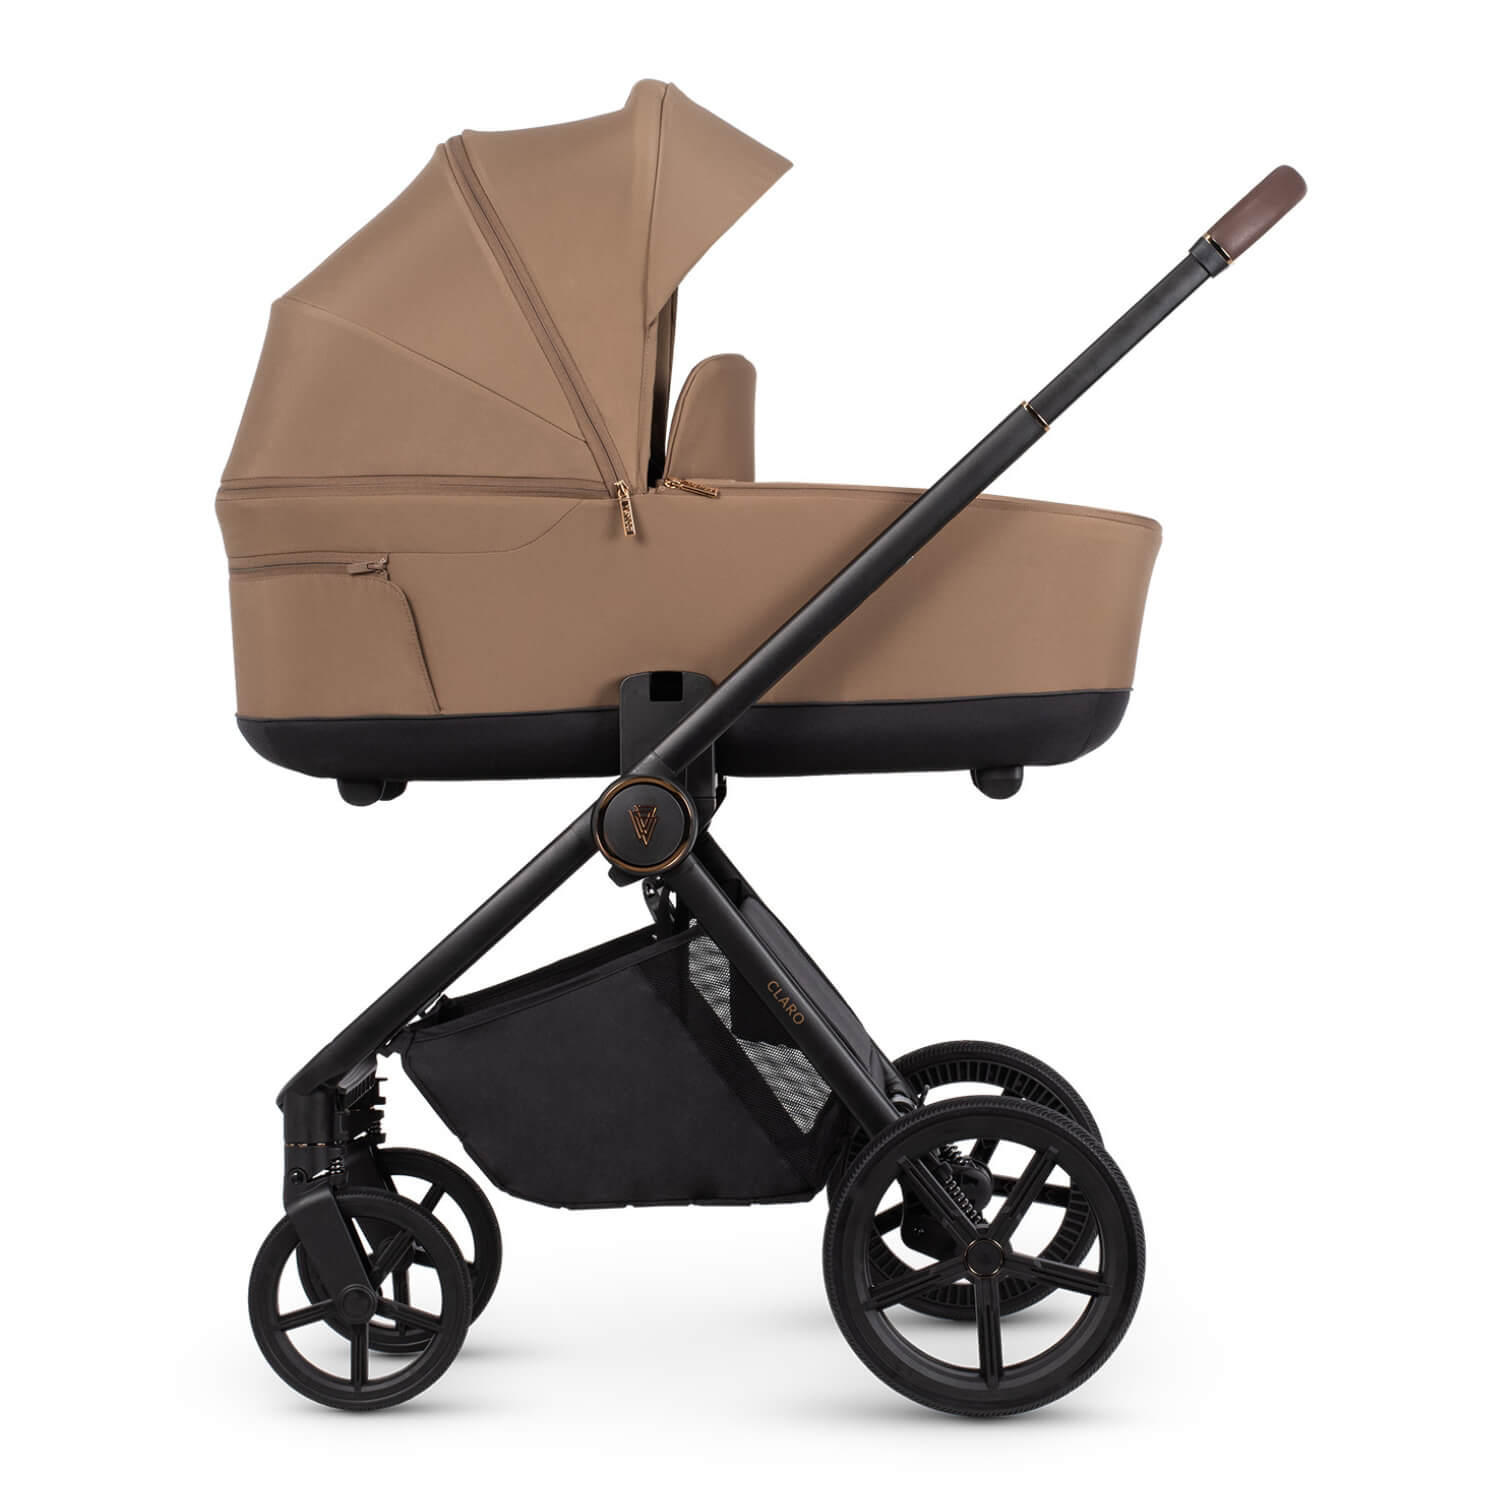 Venicci Claro carrycot in Caramel colour placed in the Claro frame